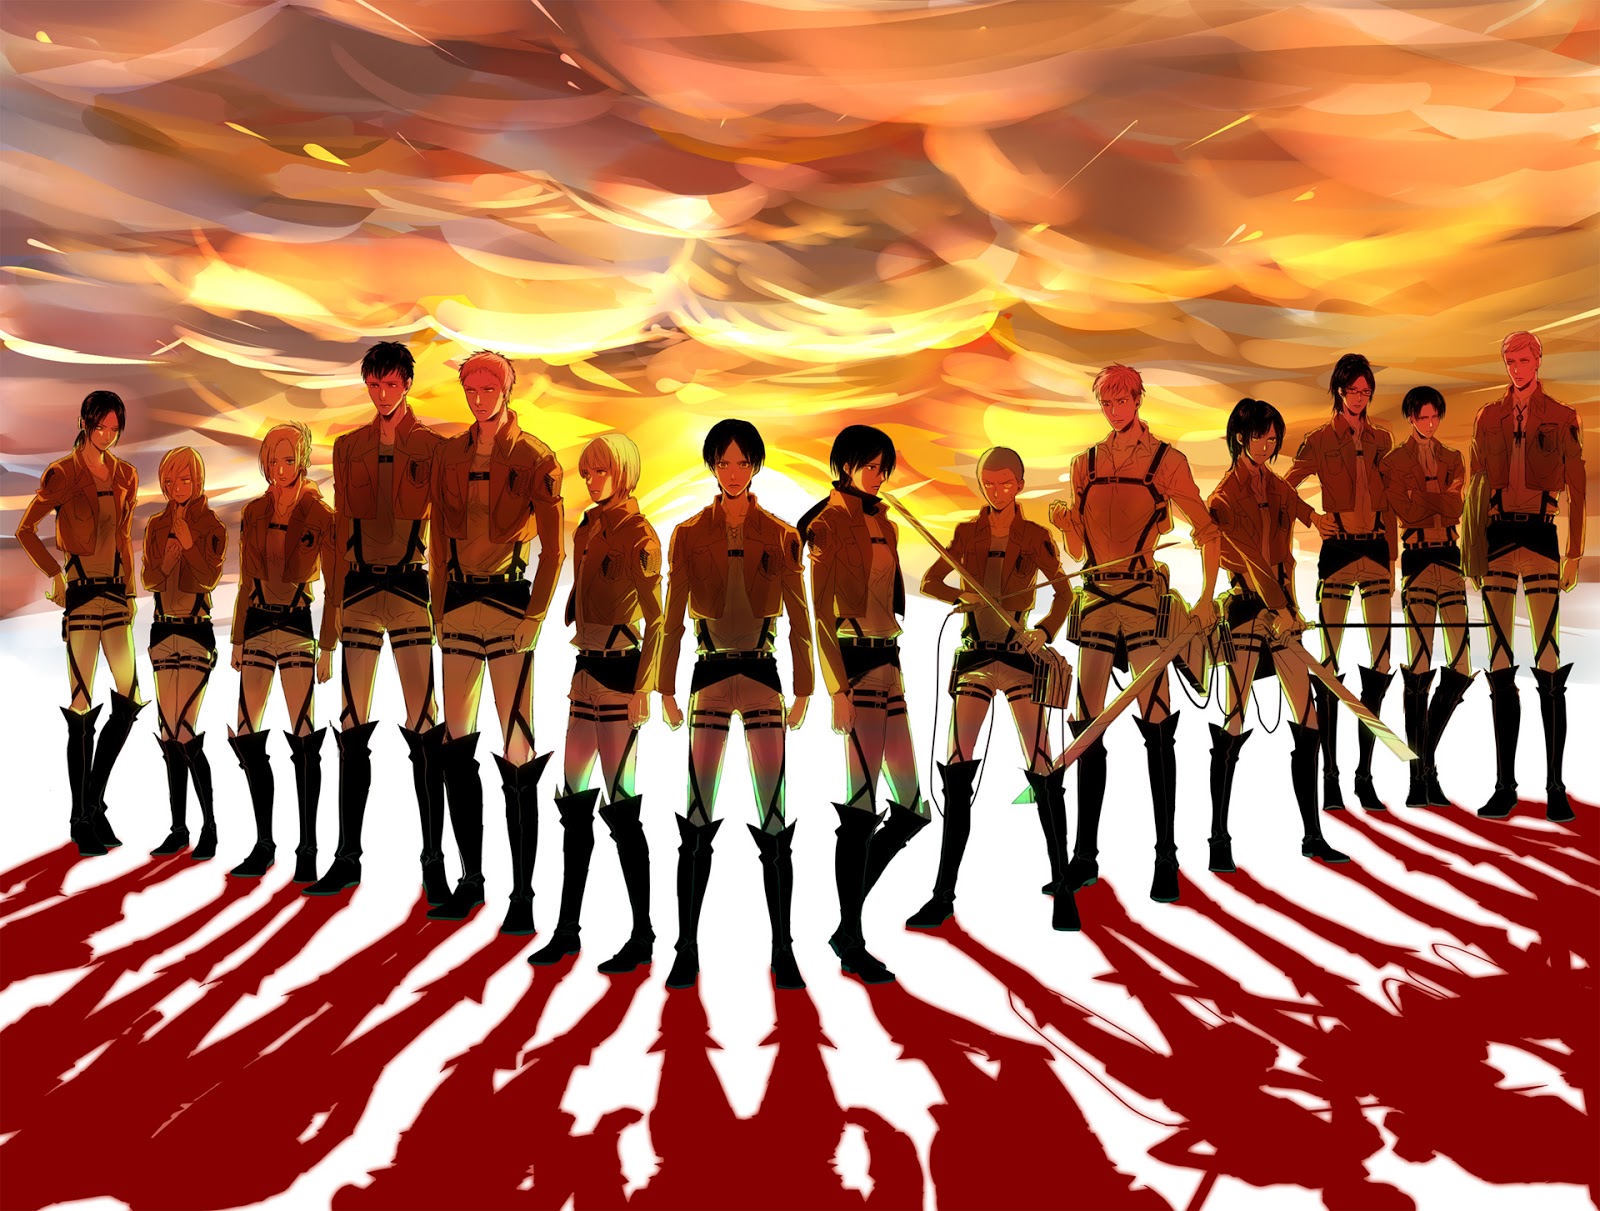 Attack on Titan Anime HD Wallpaper Animation Wallpapers 1600x1211